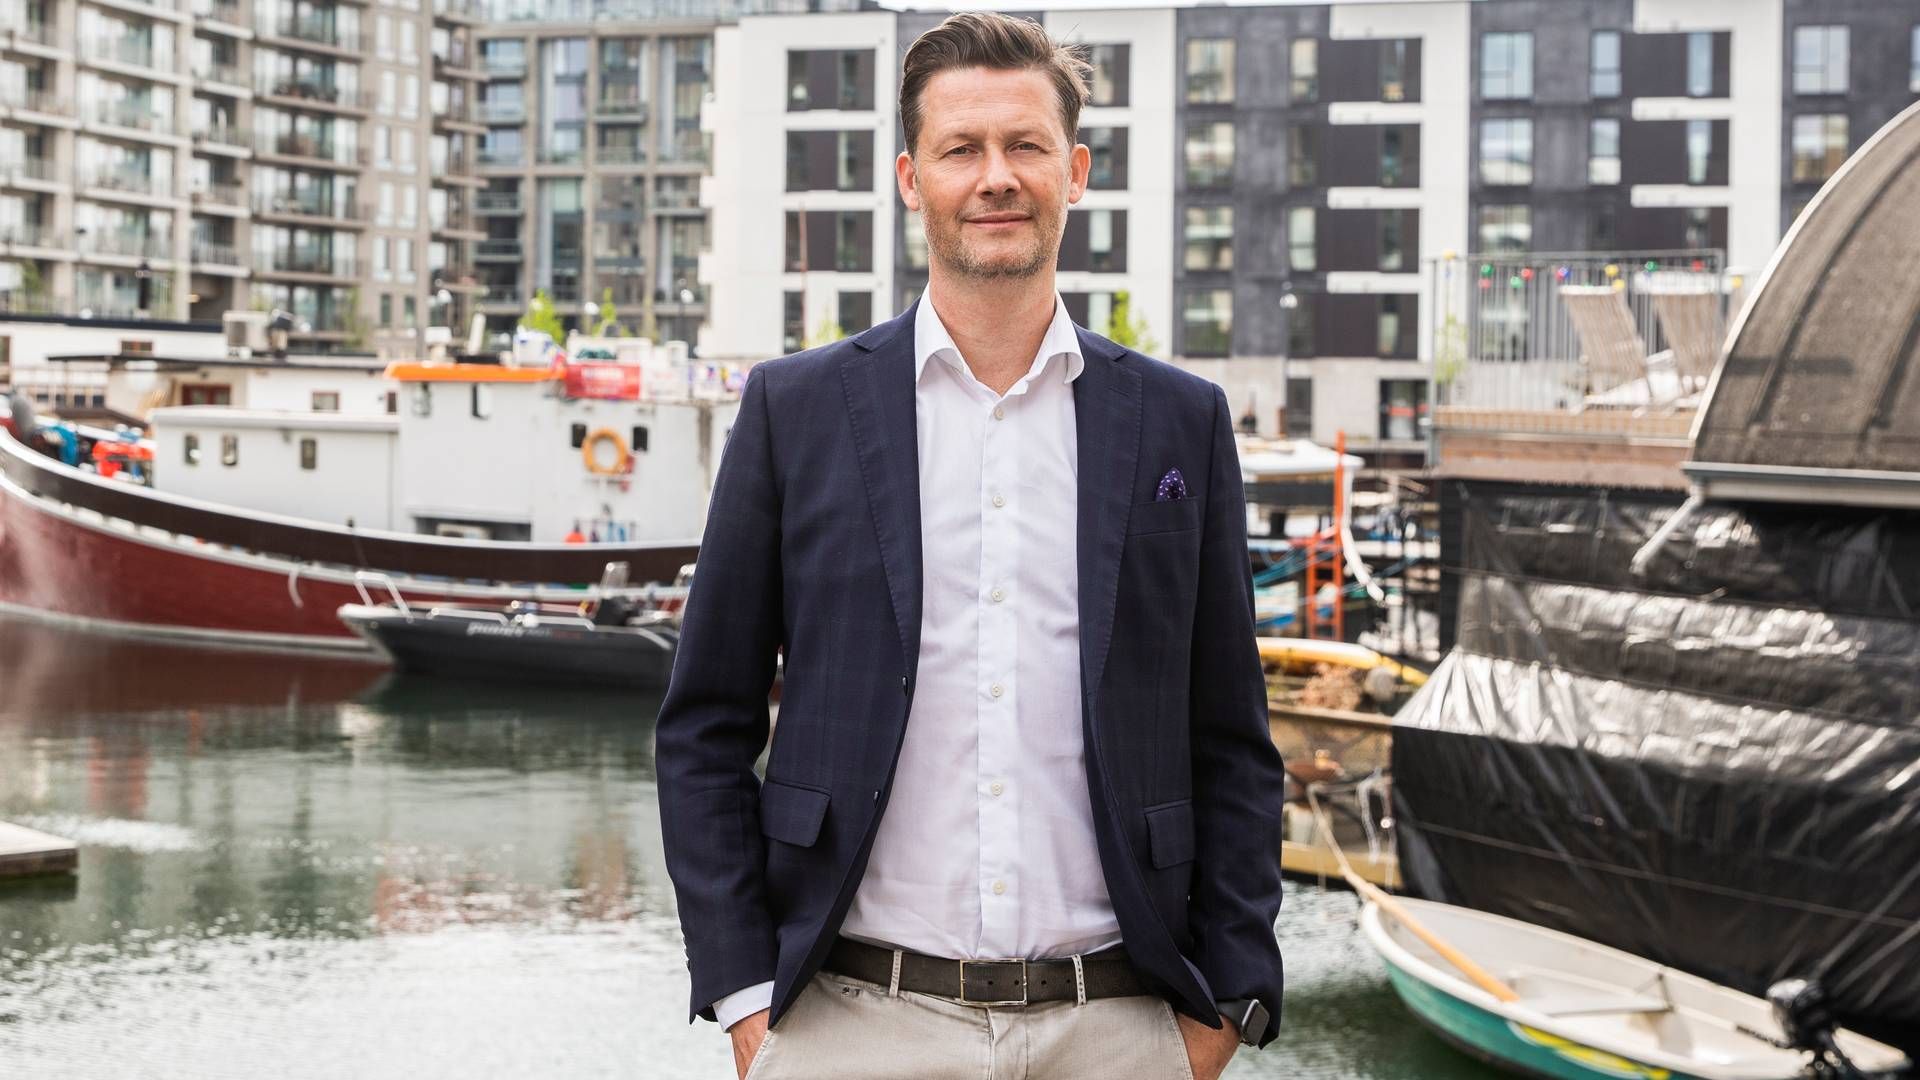 Brian Buus Madsen will take on the role as acting country manager of Nordnet in Denmark once Anne Buchardt departs the company. | Photo: Pr/nordnet